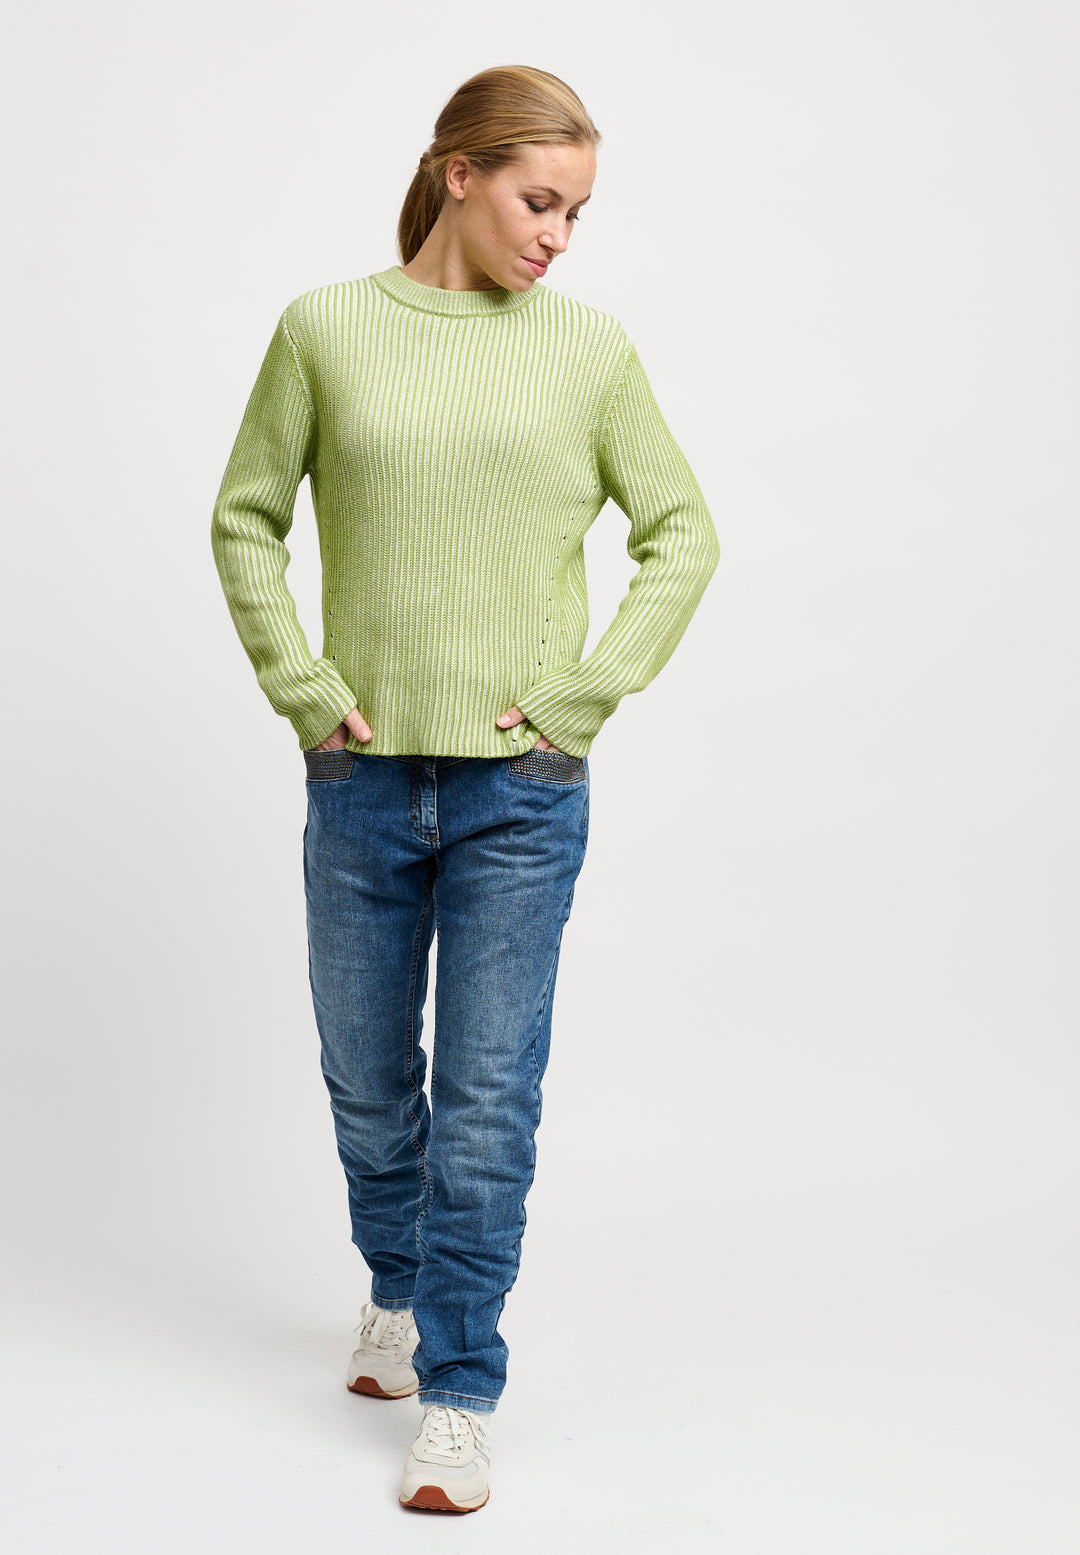 Lind Elly Knit Pullover 332 Apple